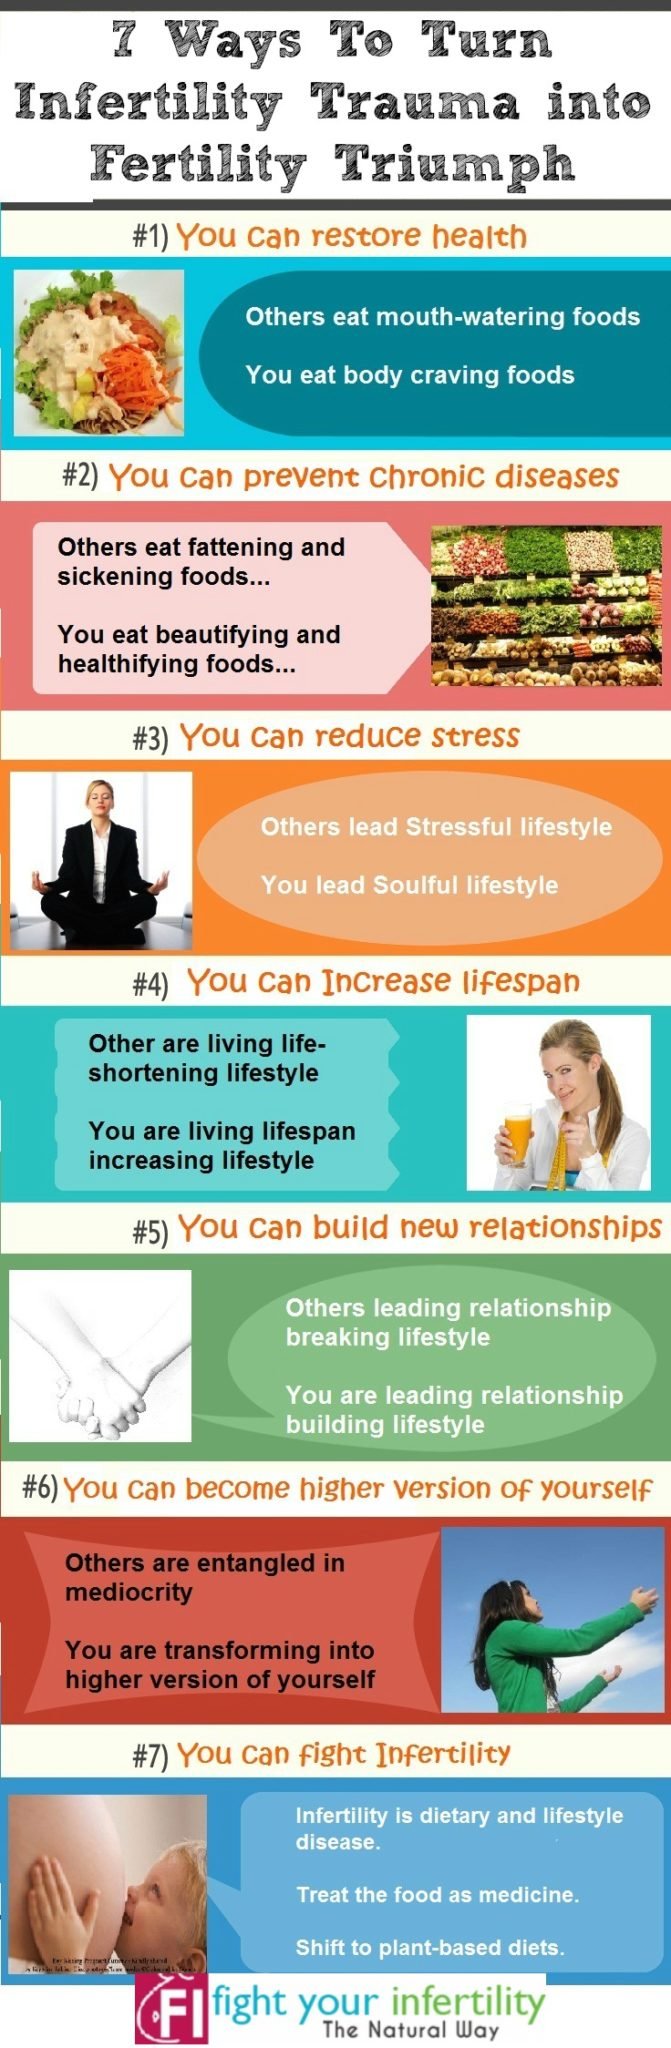 how to reduce stress, reduce stress, infertility, how to fight infertility, fight infertility, stress